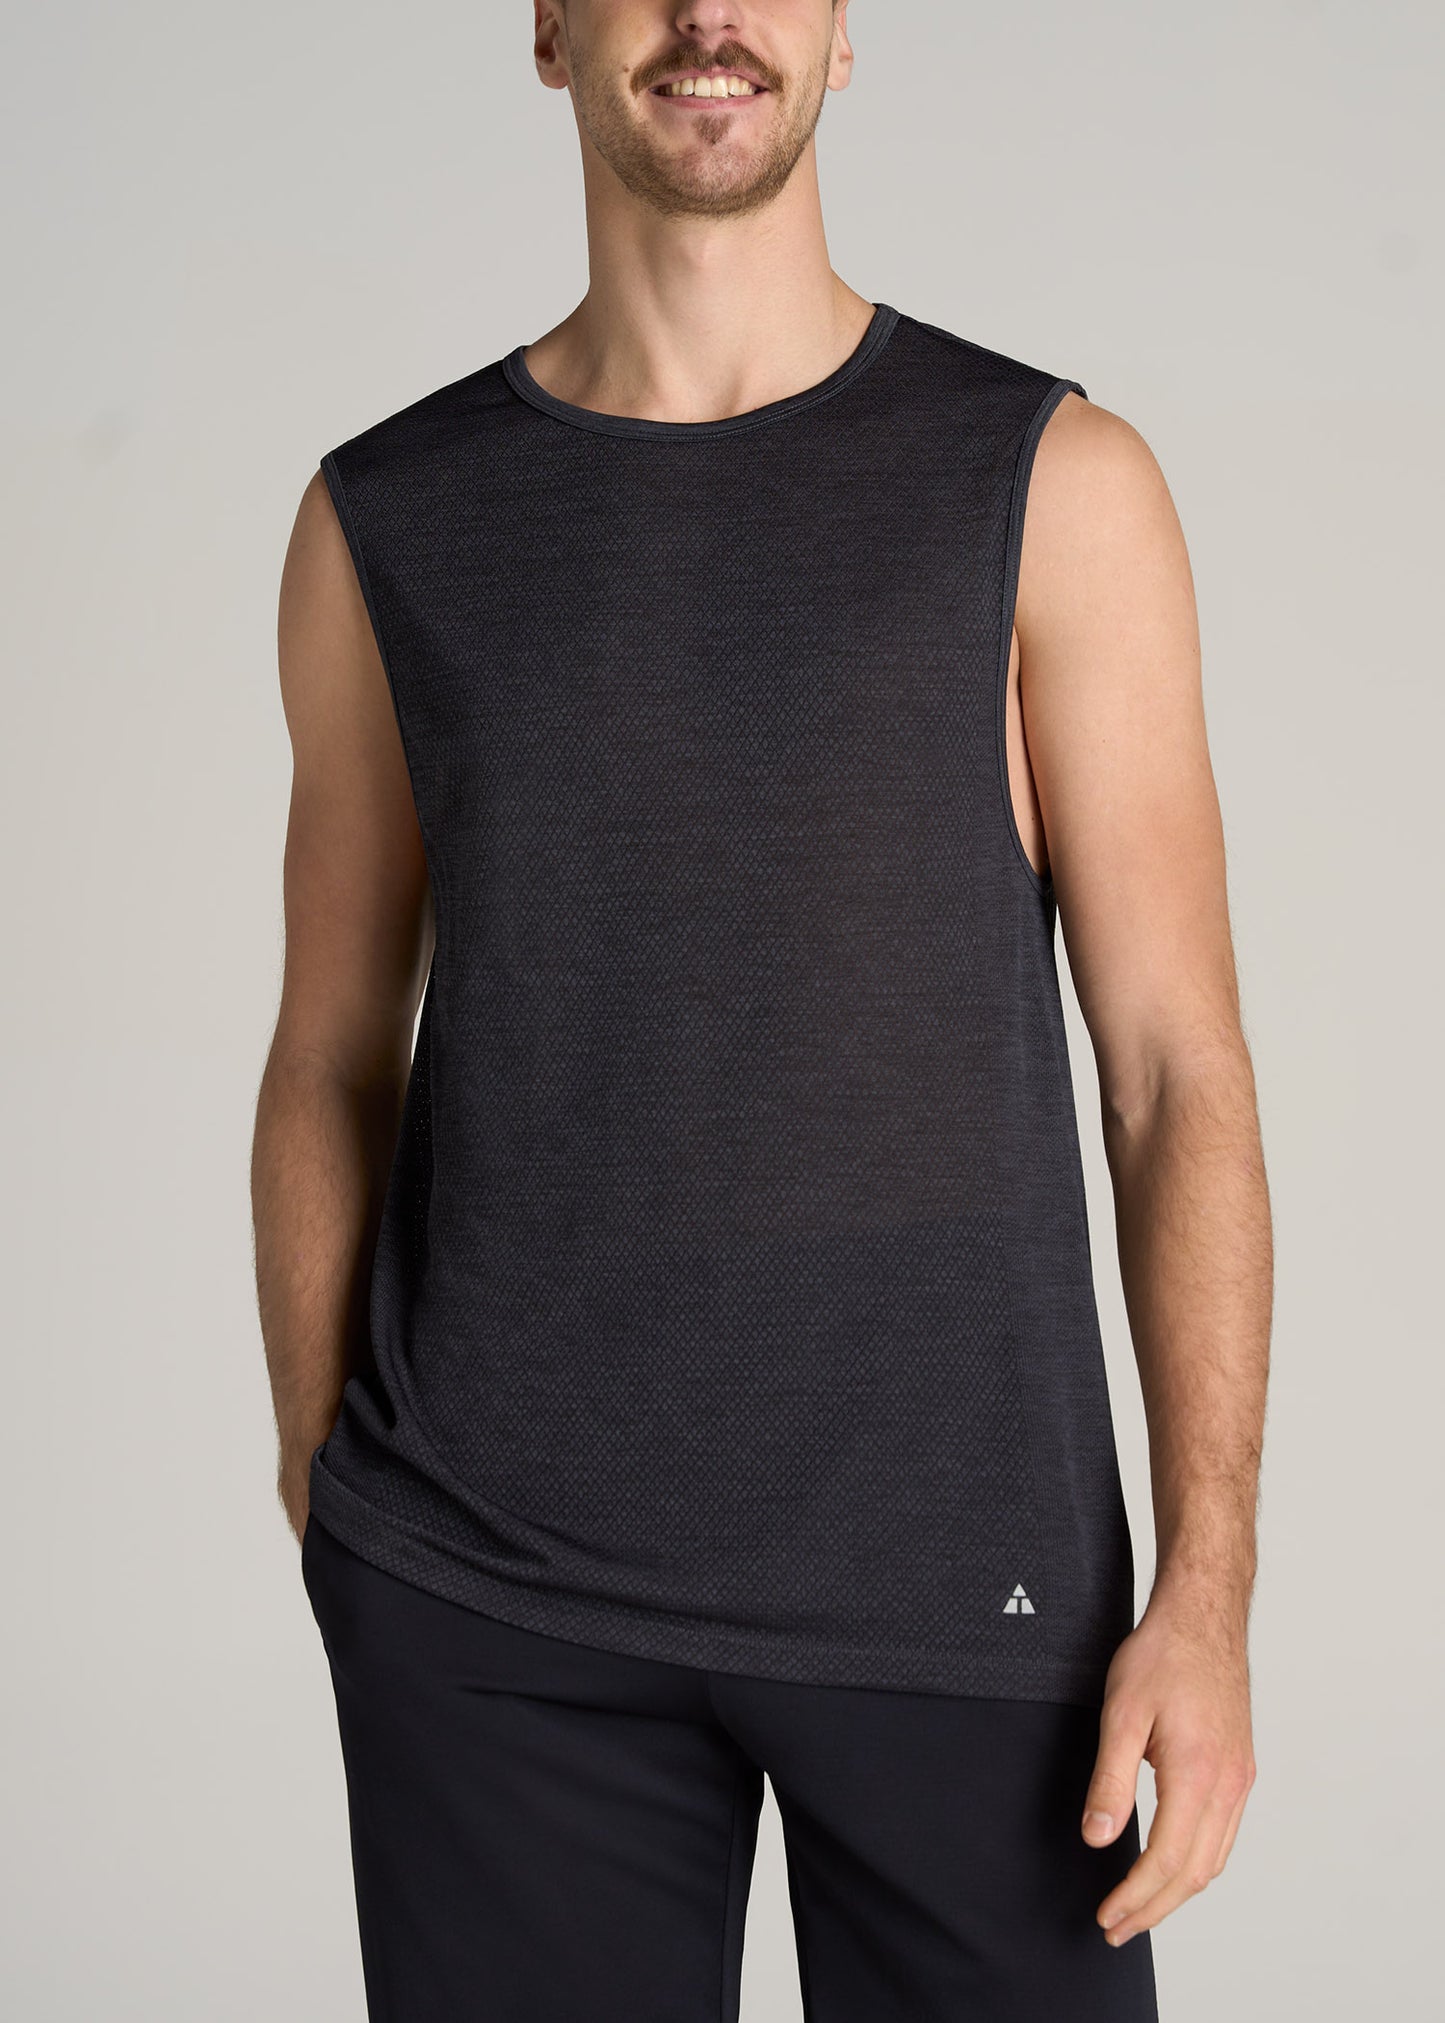 American-Tall-Men-Performance-SLIM-FIT-Engineered-Tank-Top-Charcoal-Mix-front